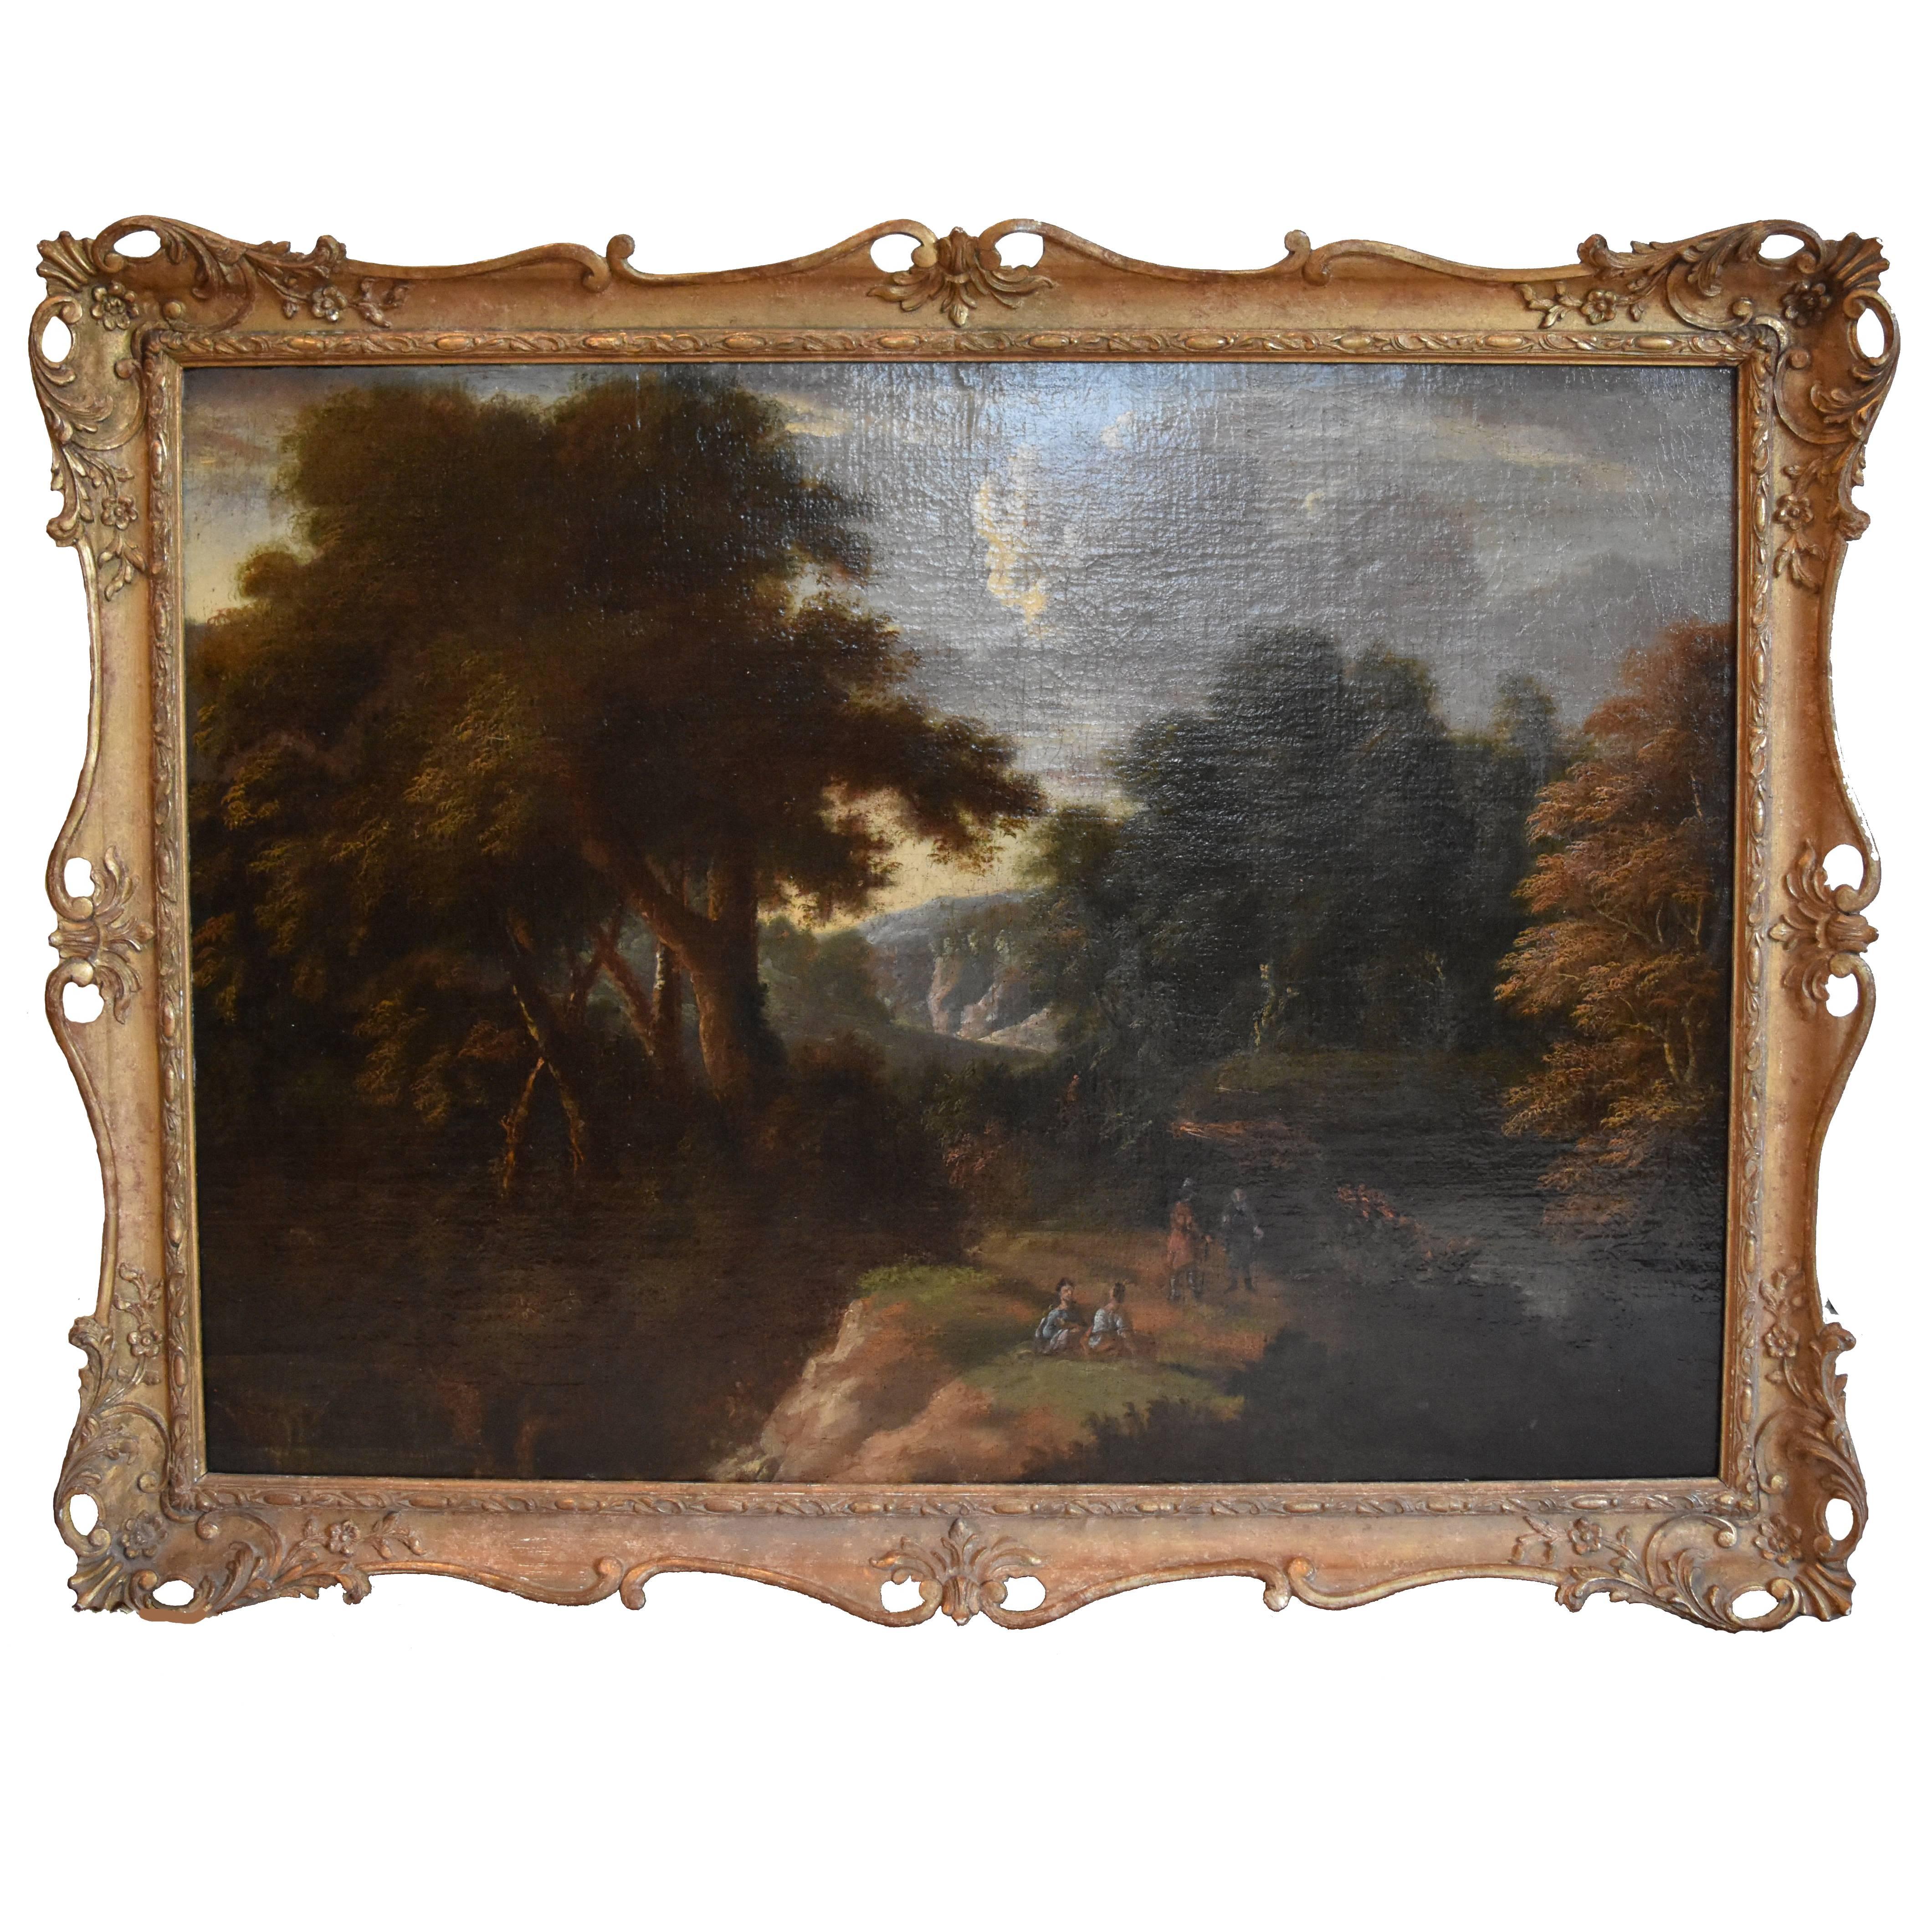 17th Century English Landscape in Giltwood Frame